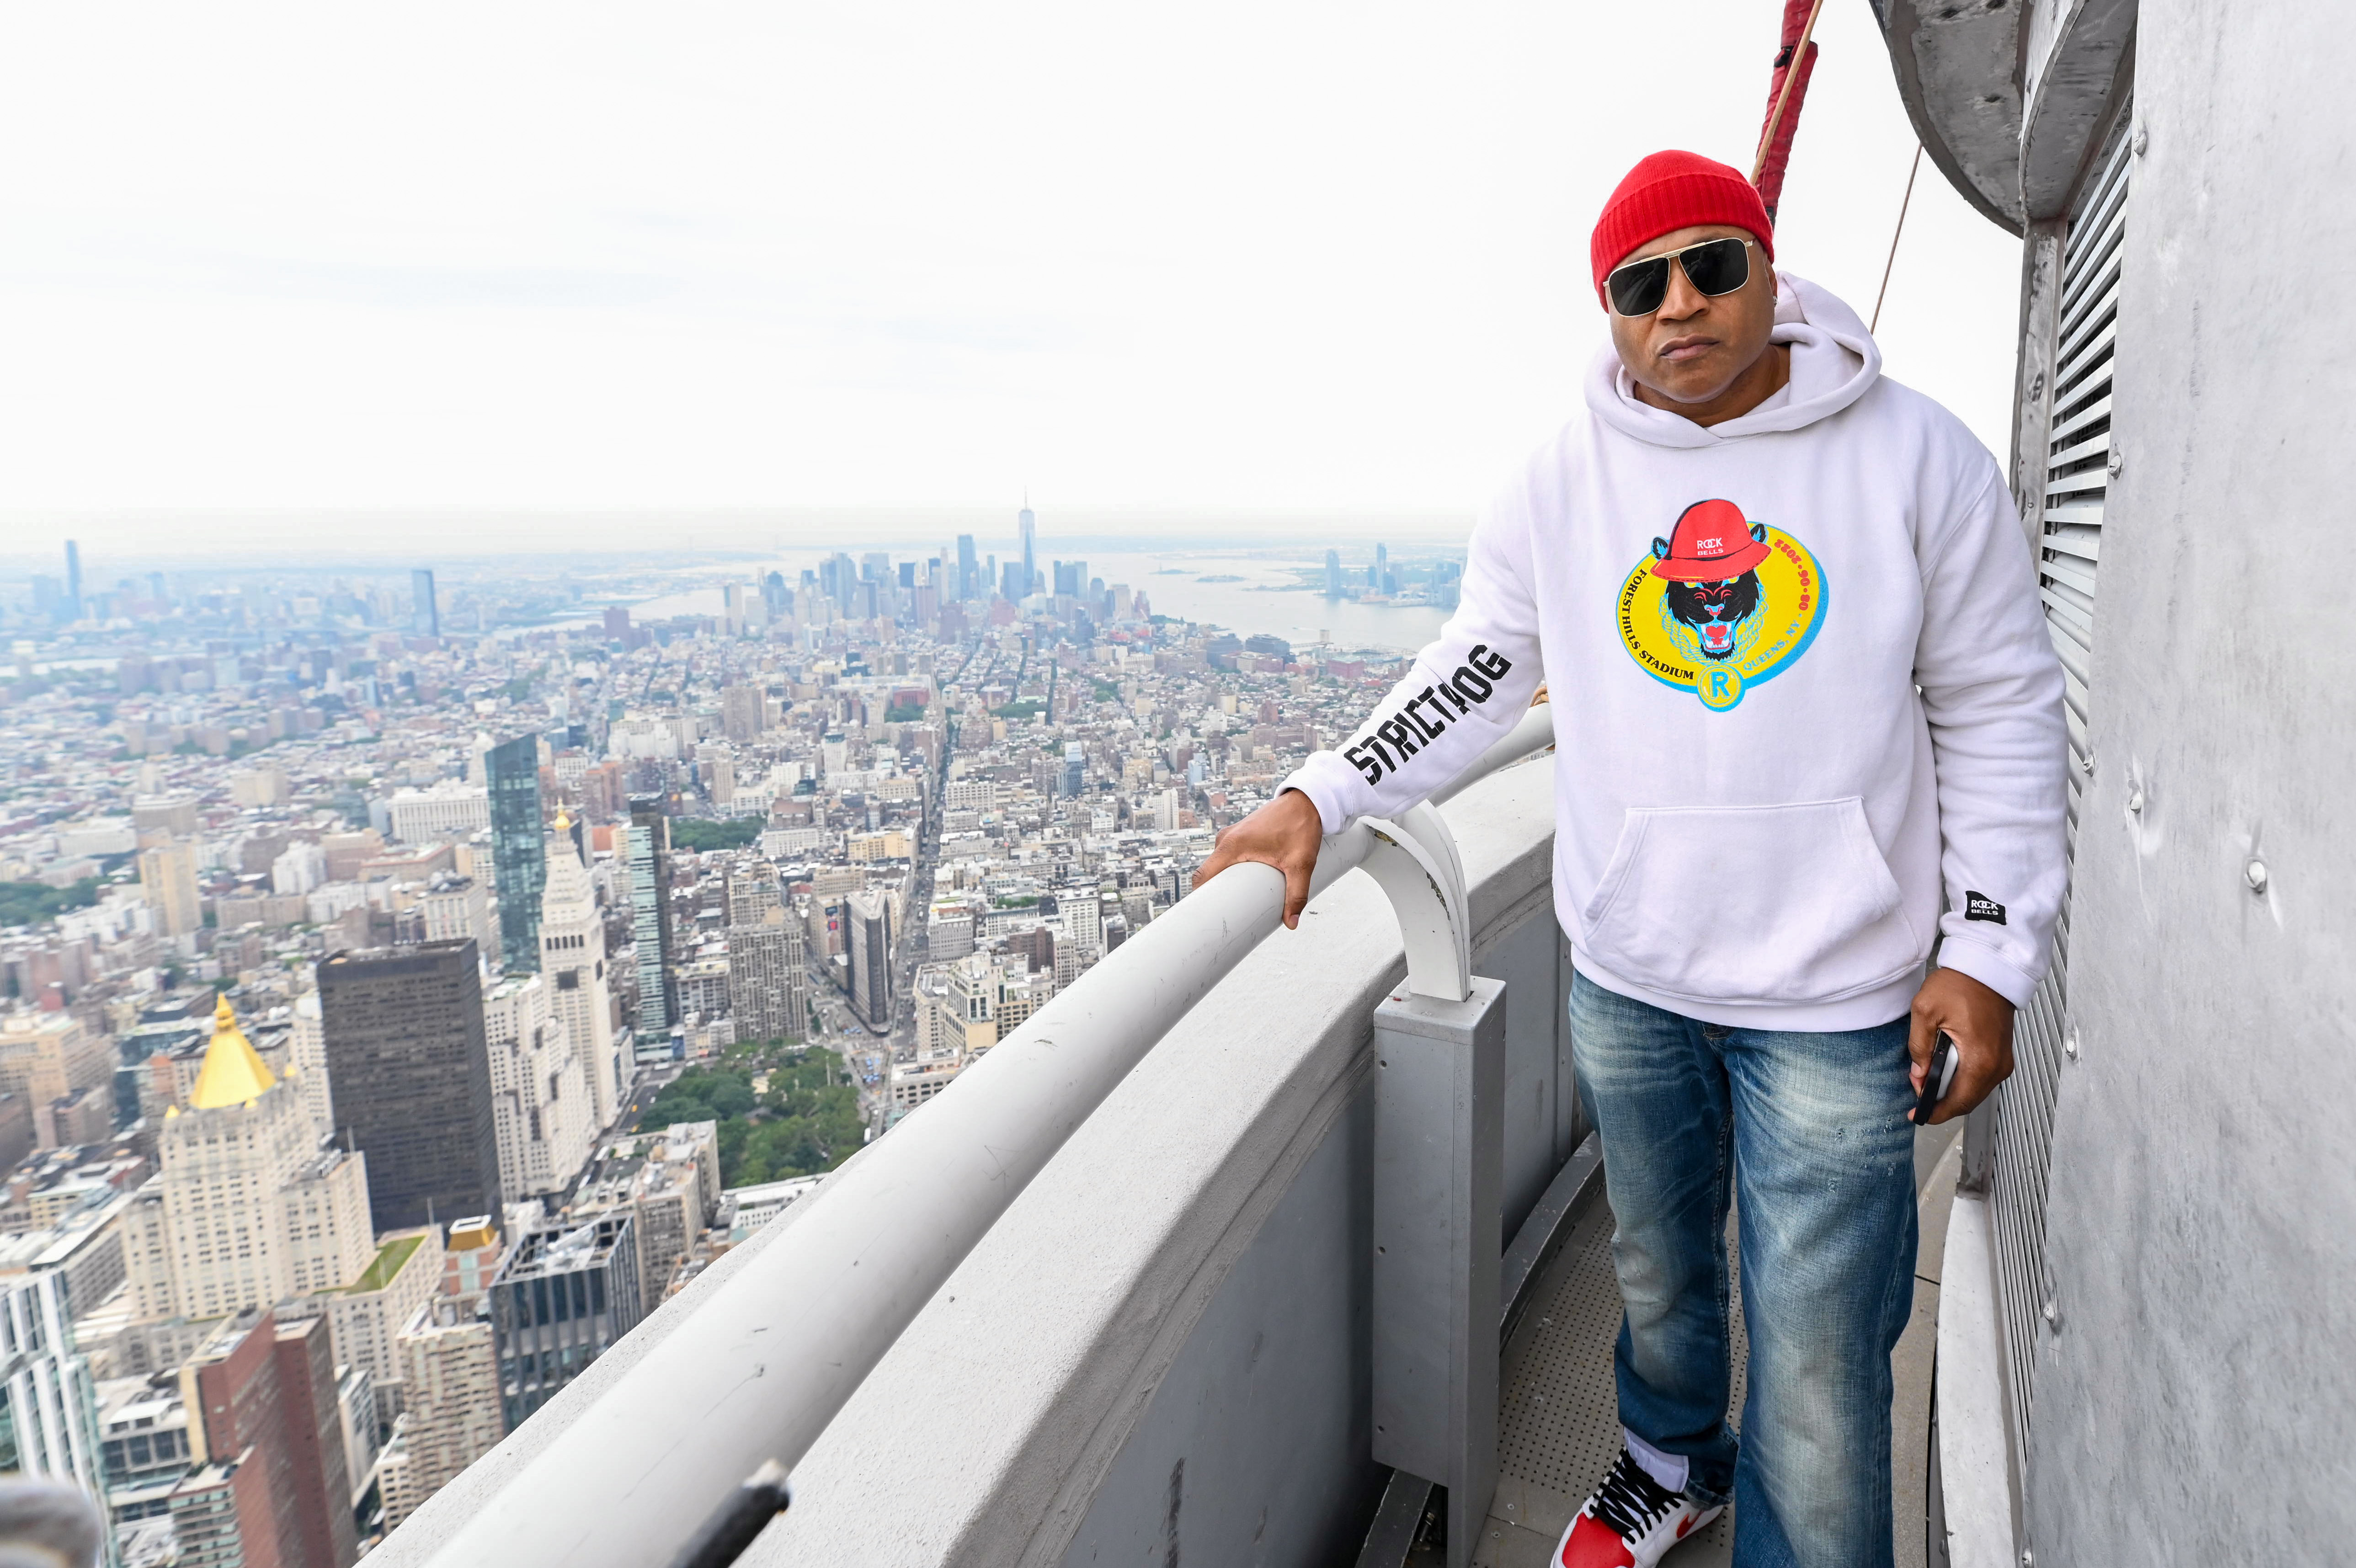 LL Cool J visits the Empire State Building on August 5, 2022 in New York City.